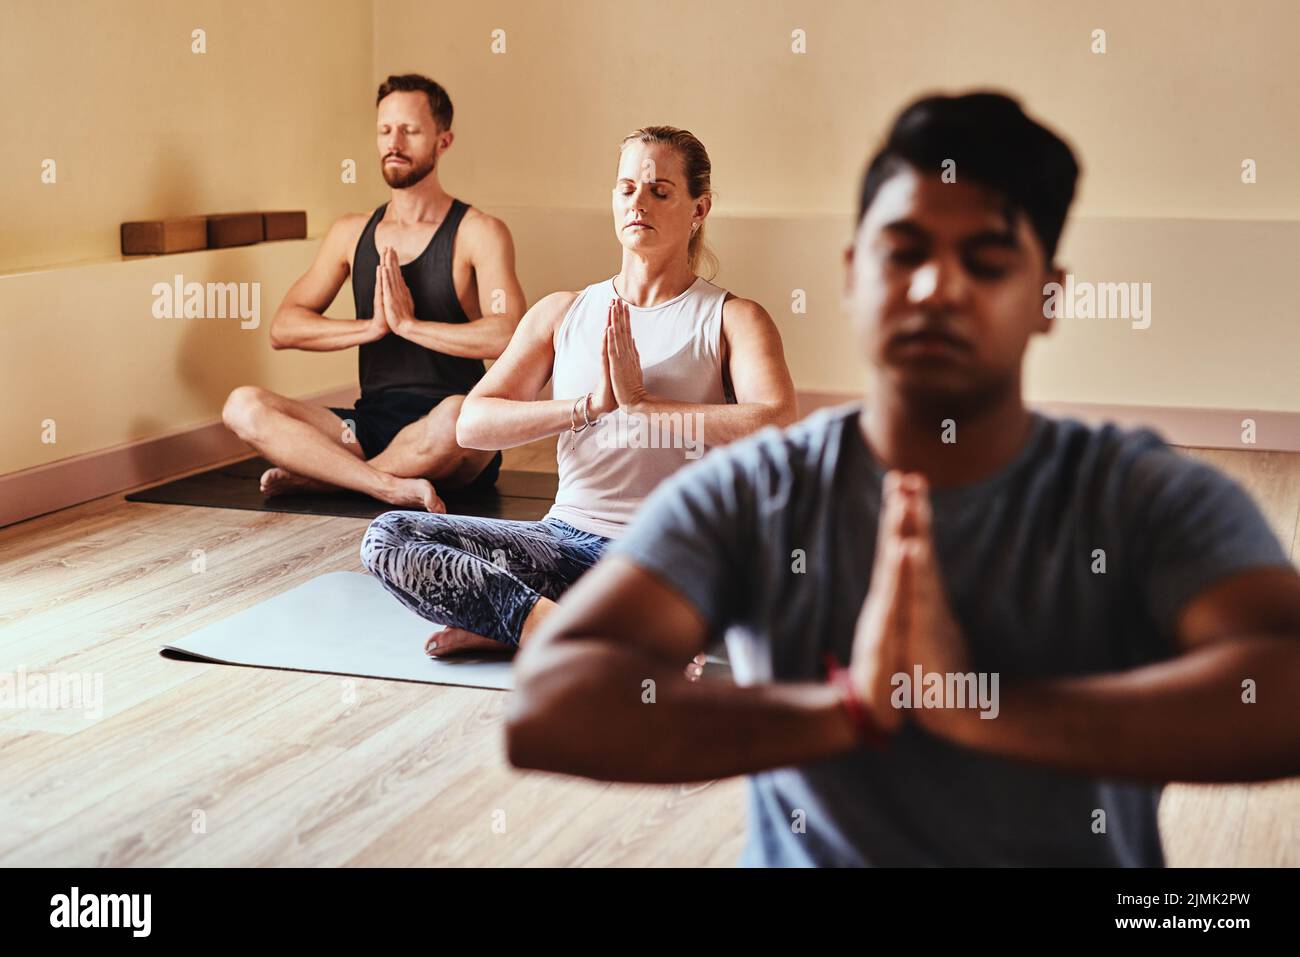 Nothing more needed. a group of young men and women meditating in a yoga class. Stock Photo